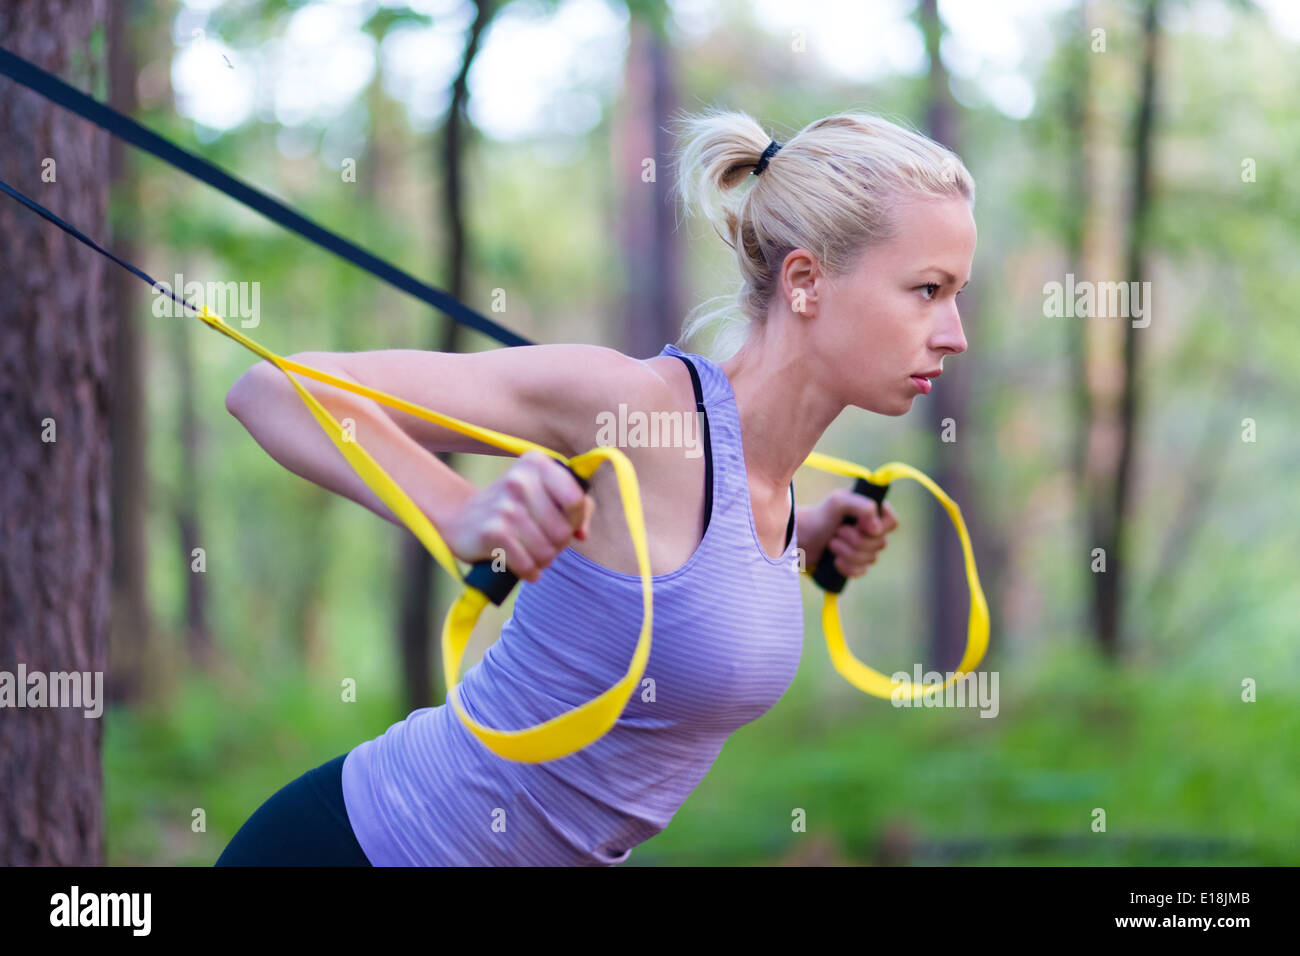 Training with fitness straps outdoors. Stock Photo